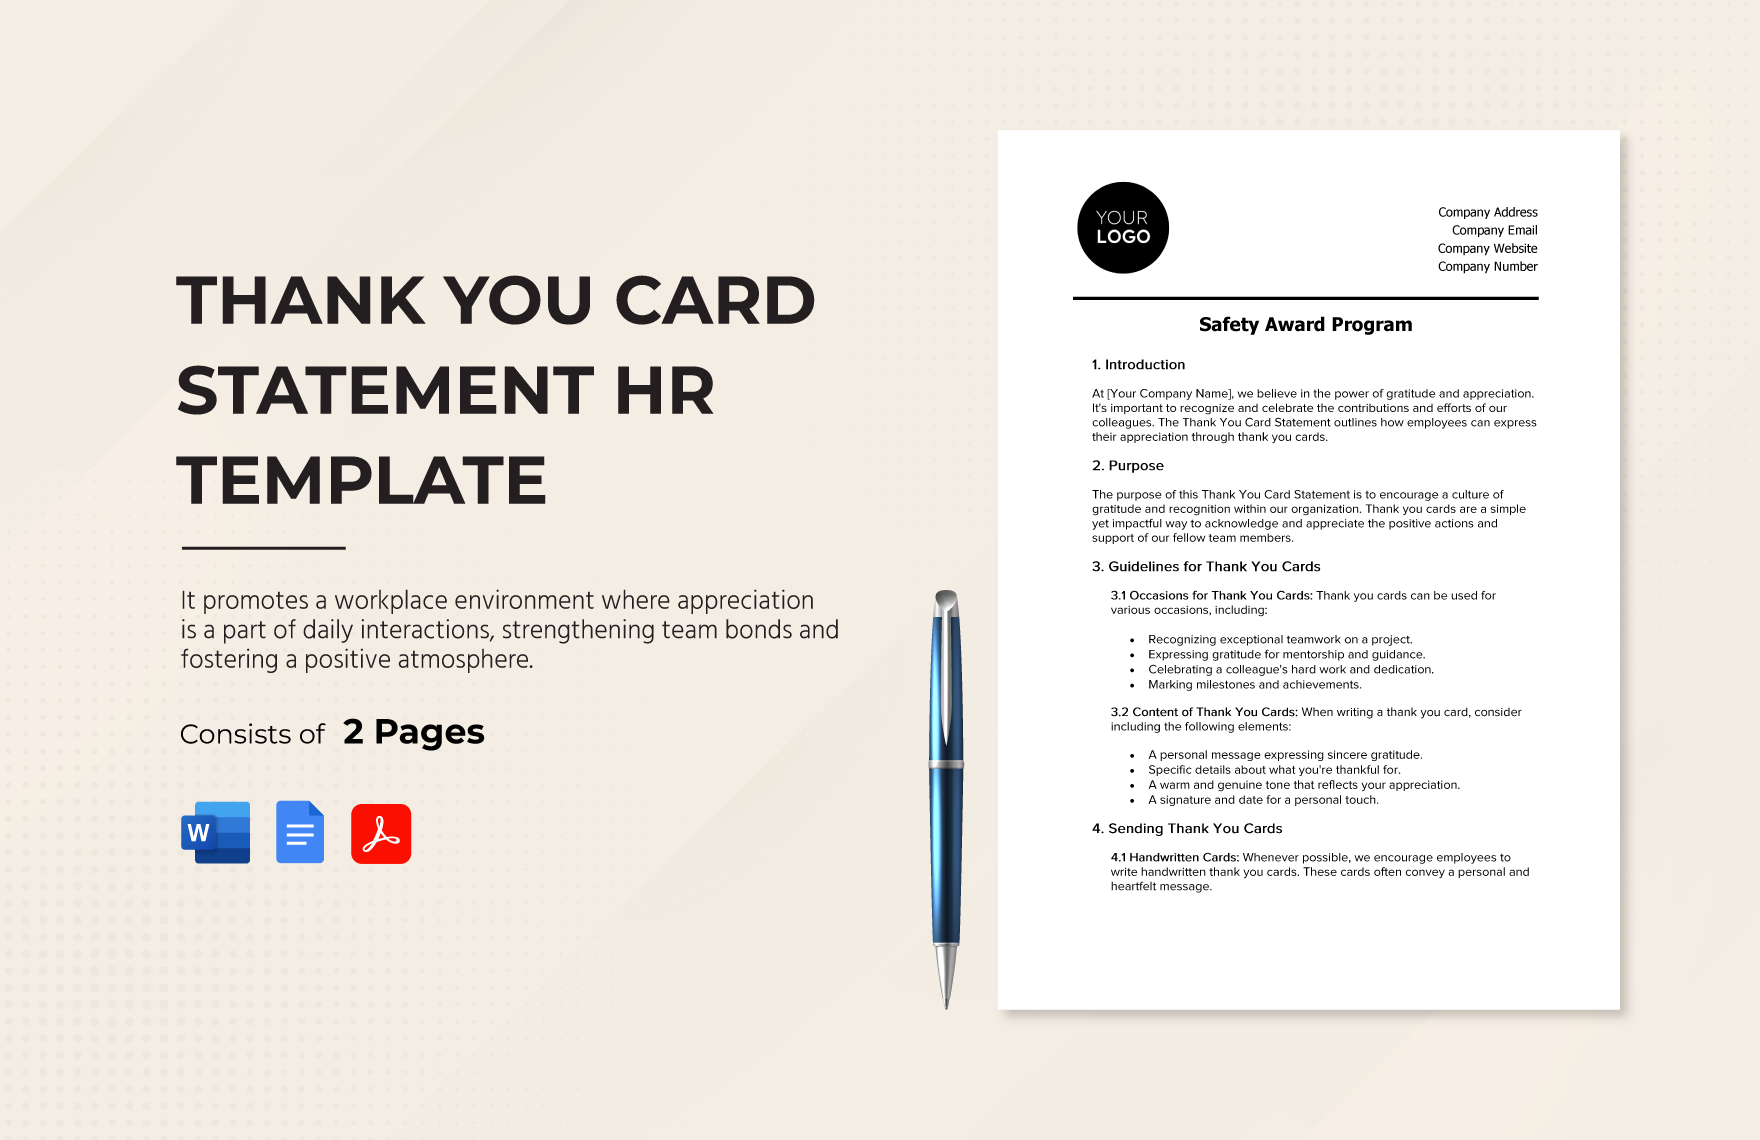 Thank You Card Statement HR Template in Word, Google Docs, PDF